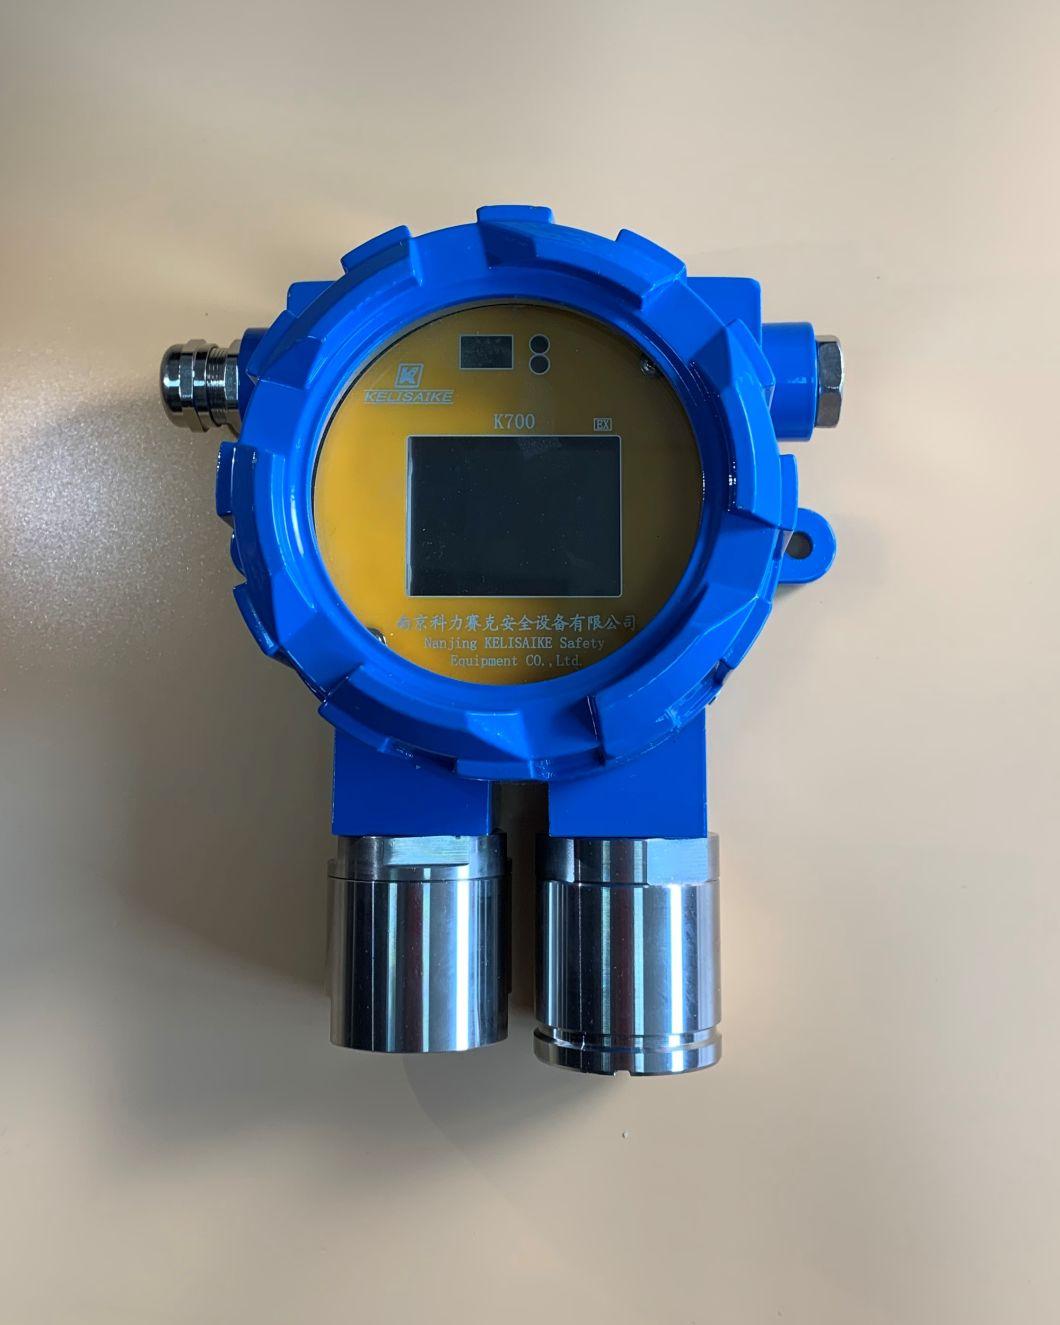 K700 Fixed Gas Detector with IP65 Water & Dust Proof